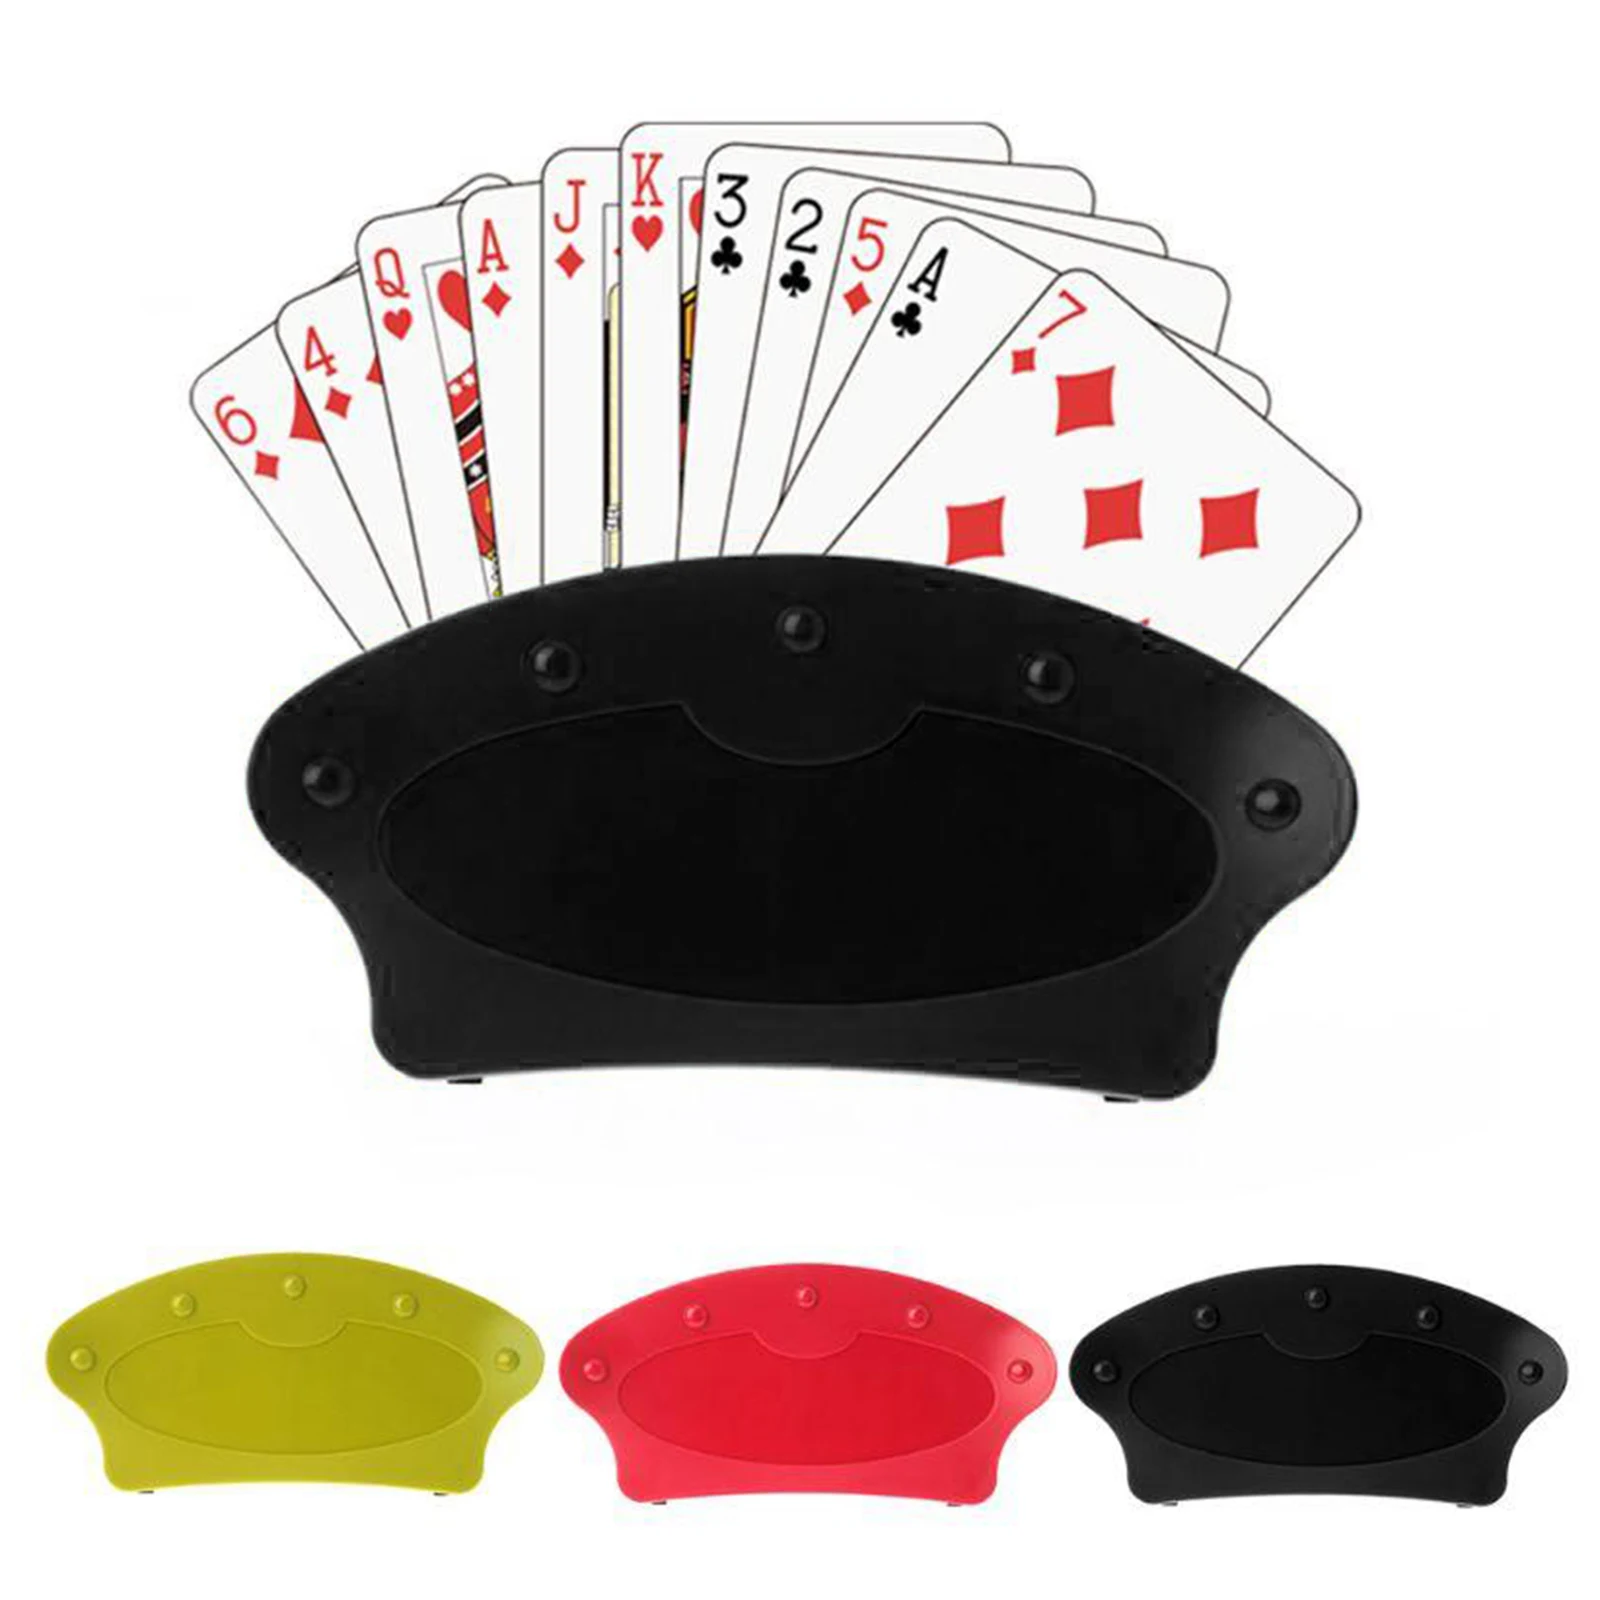 Hands Free Plastic Playing Card Holders Stand Clip bridge card Poker Seat